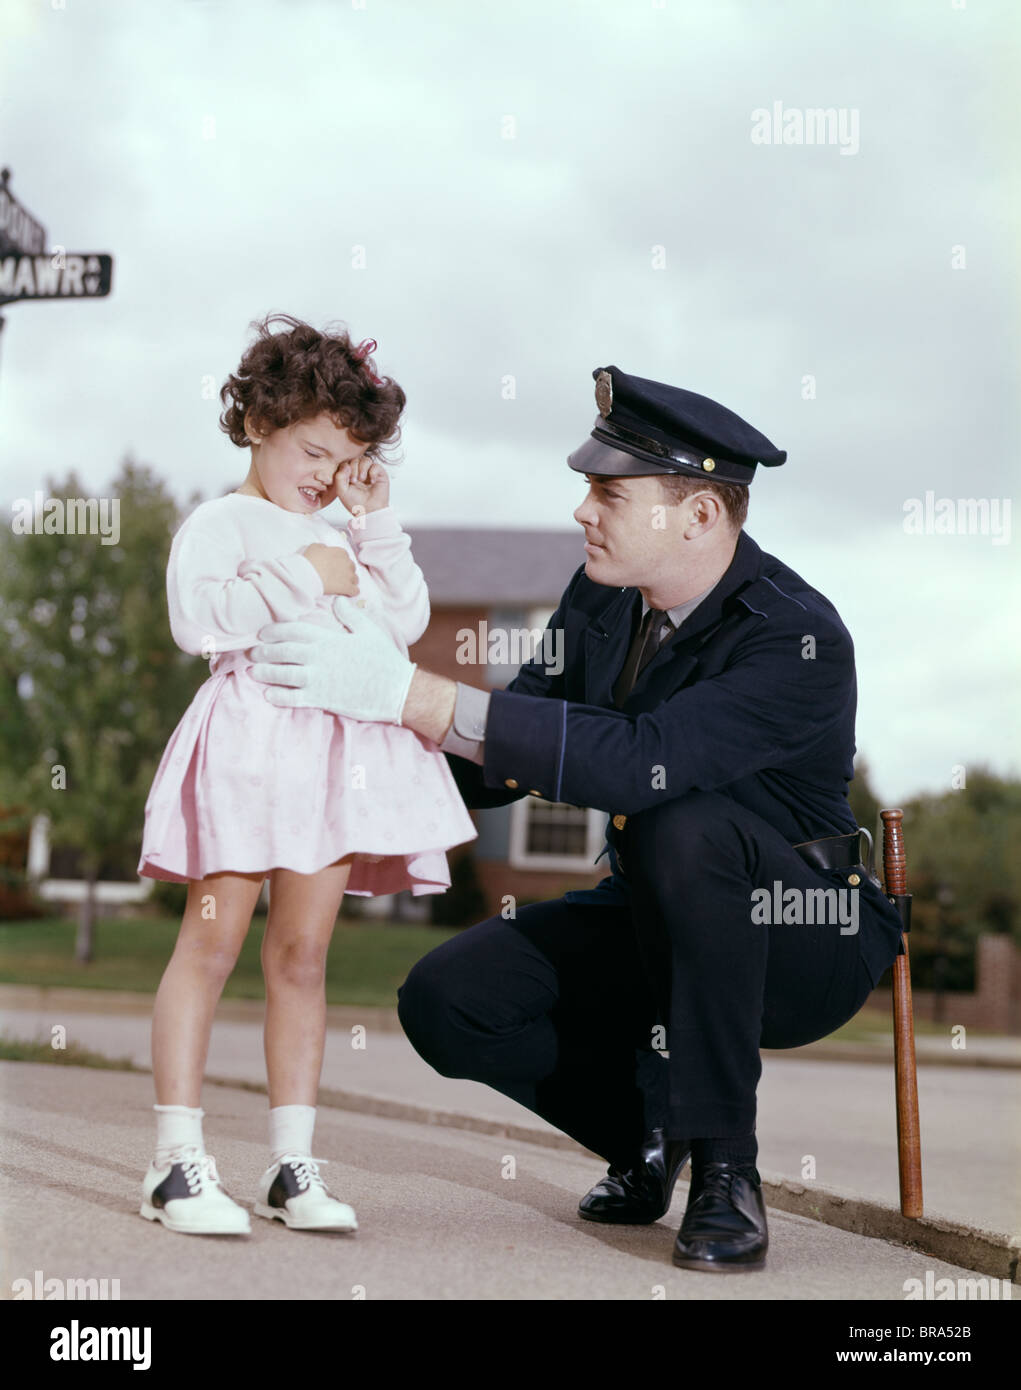 1960 1960s RETRO POLICE OFFICER GIRL LOST CRYING Stock Photo